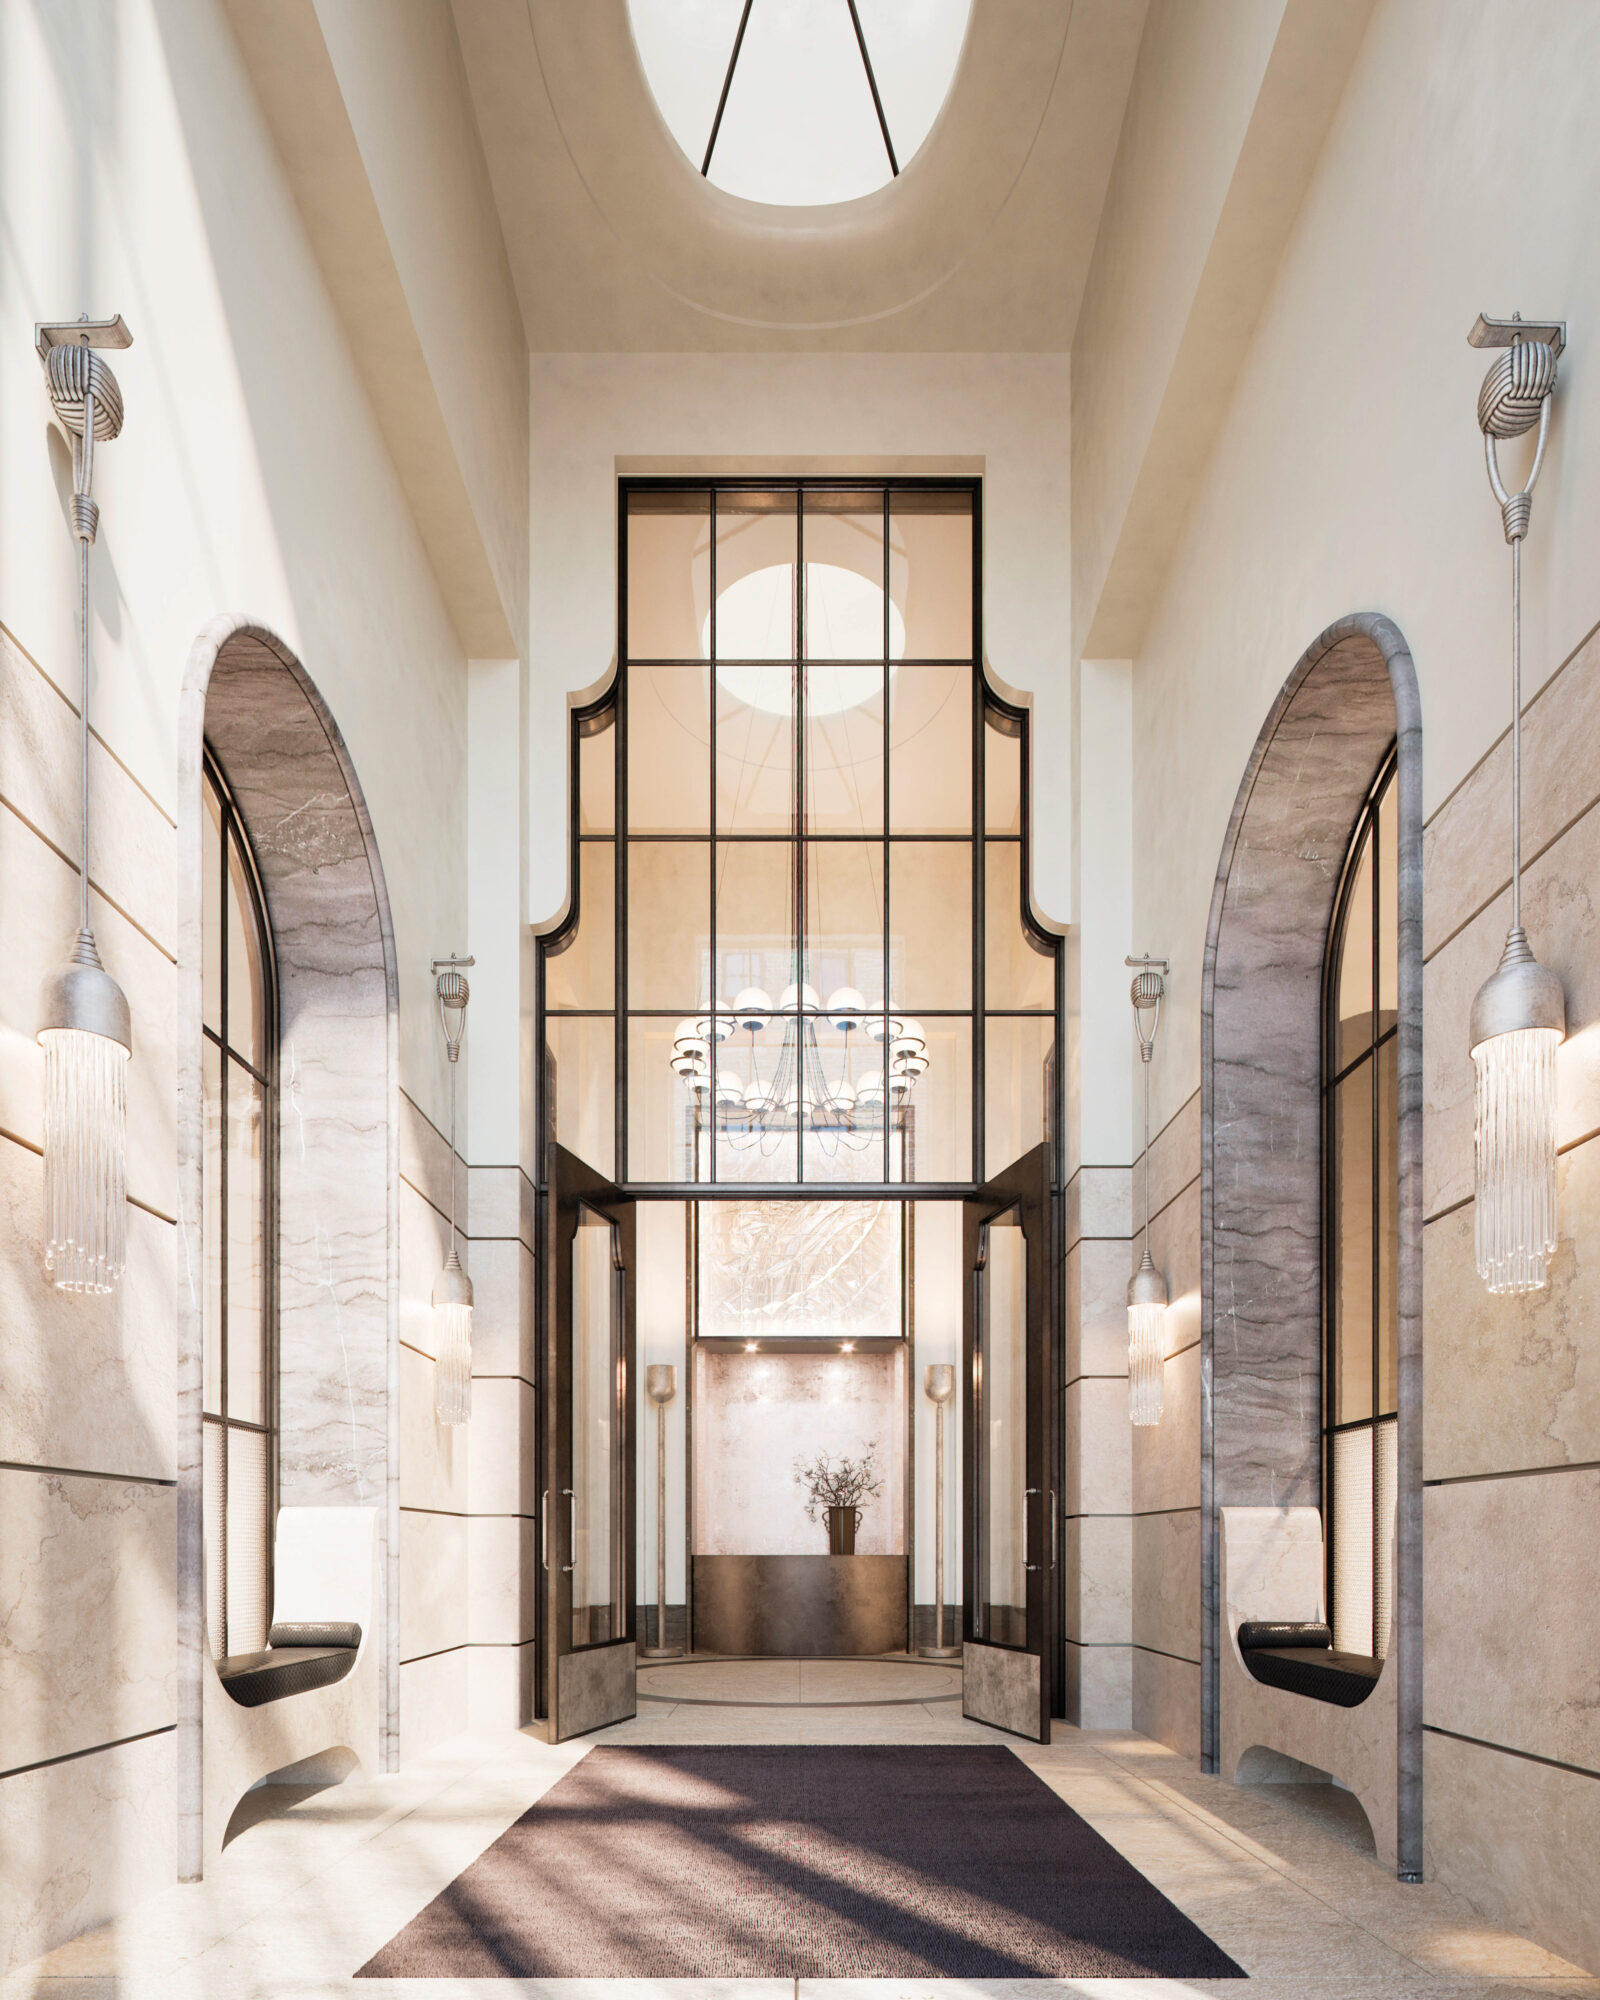 entrance to Manhattan luxury high rise with large arched windows